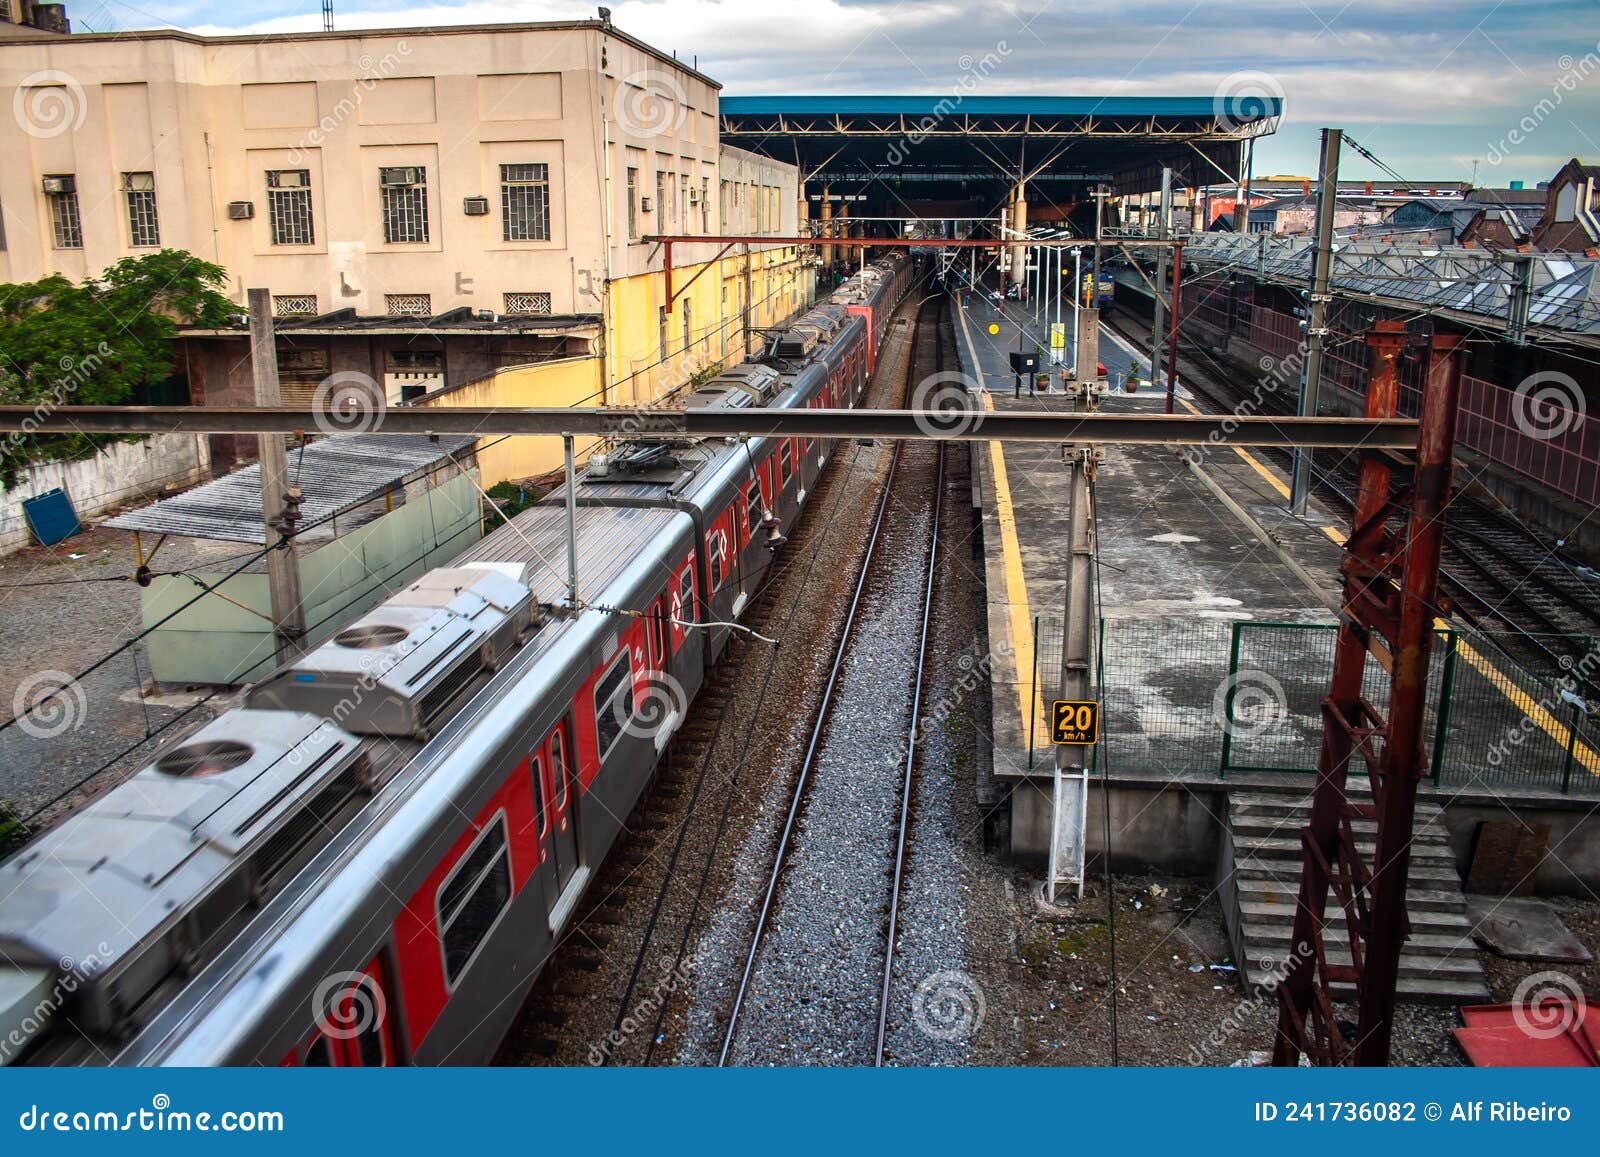 View of the Platform of Bras Station in Sao Paulo Editorial Photography -  Image of brazil, metropolitan: 241736082